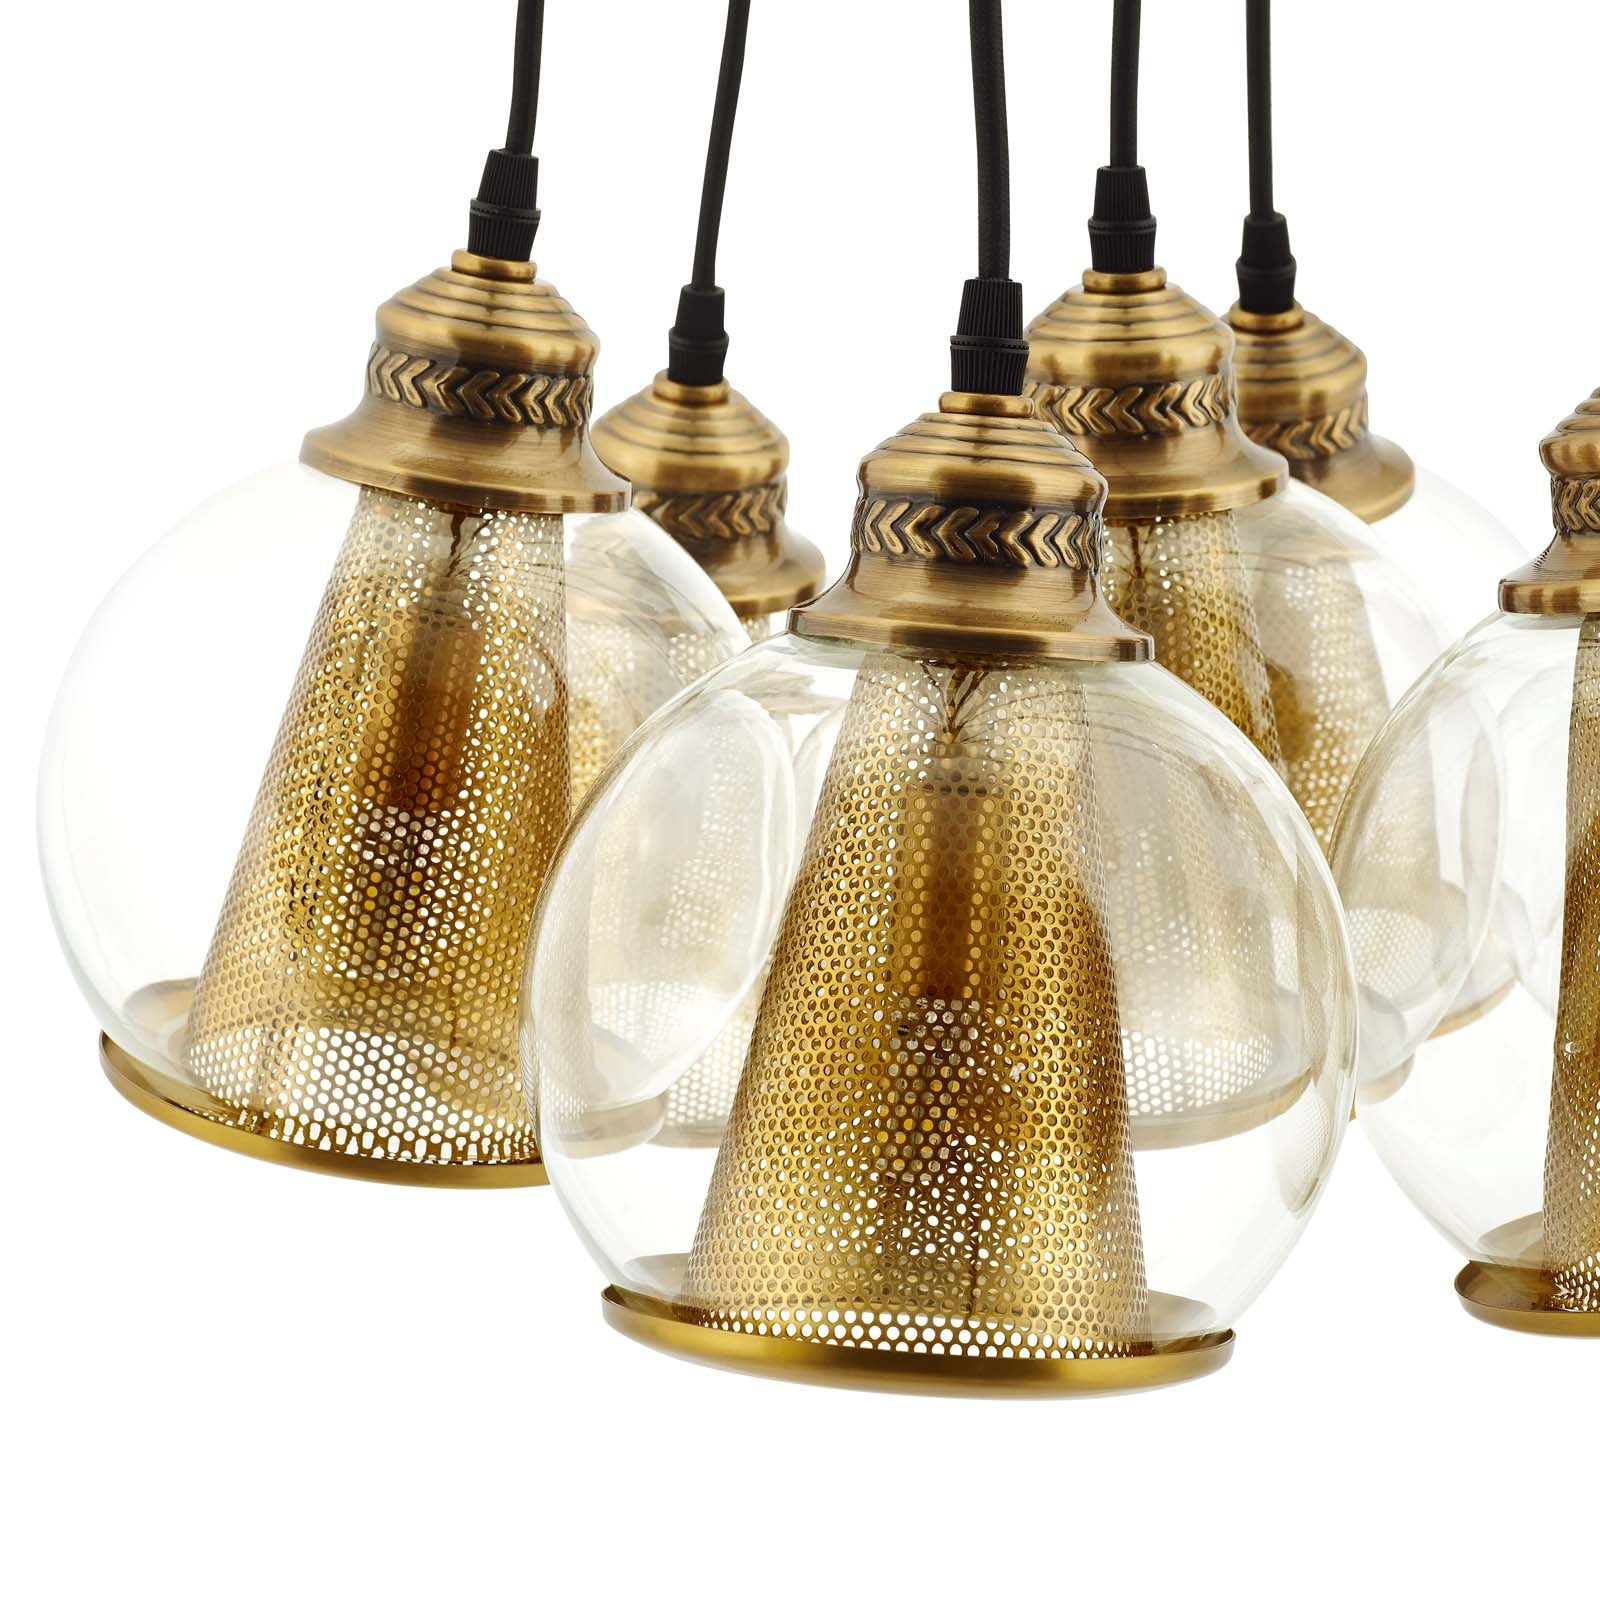 Modway Ceiling Lights - Peak Brass Cone and Glass Globe Cluster Pendant Chandelier Brass